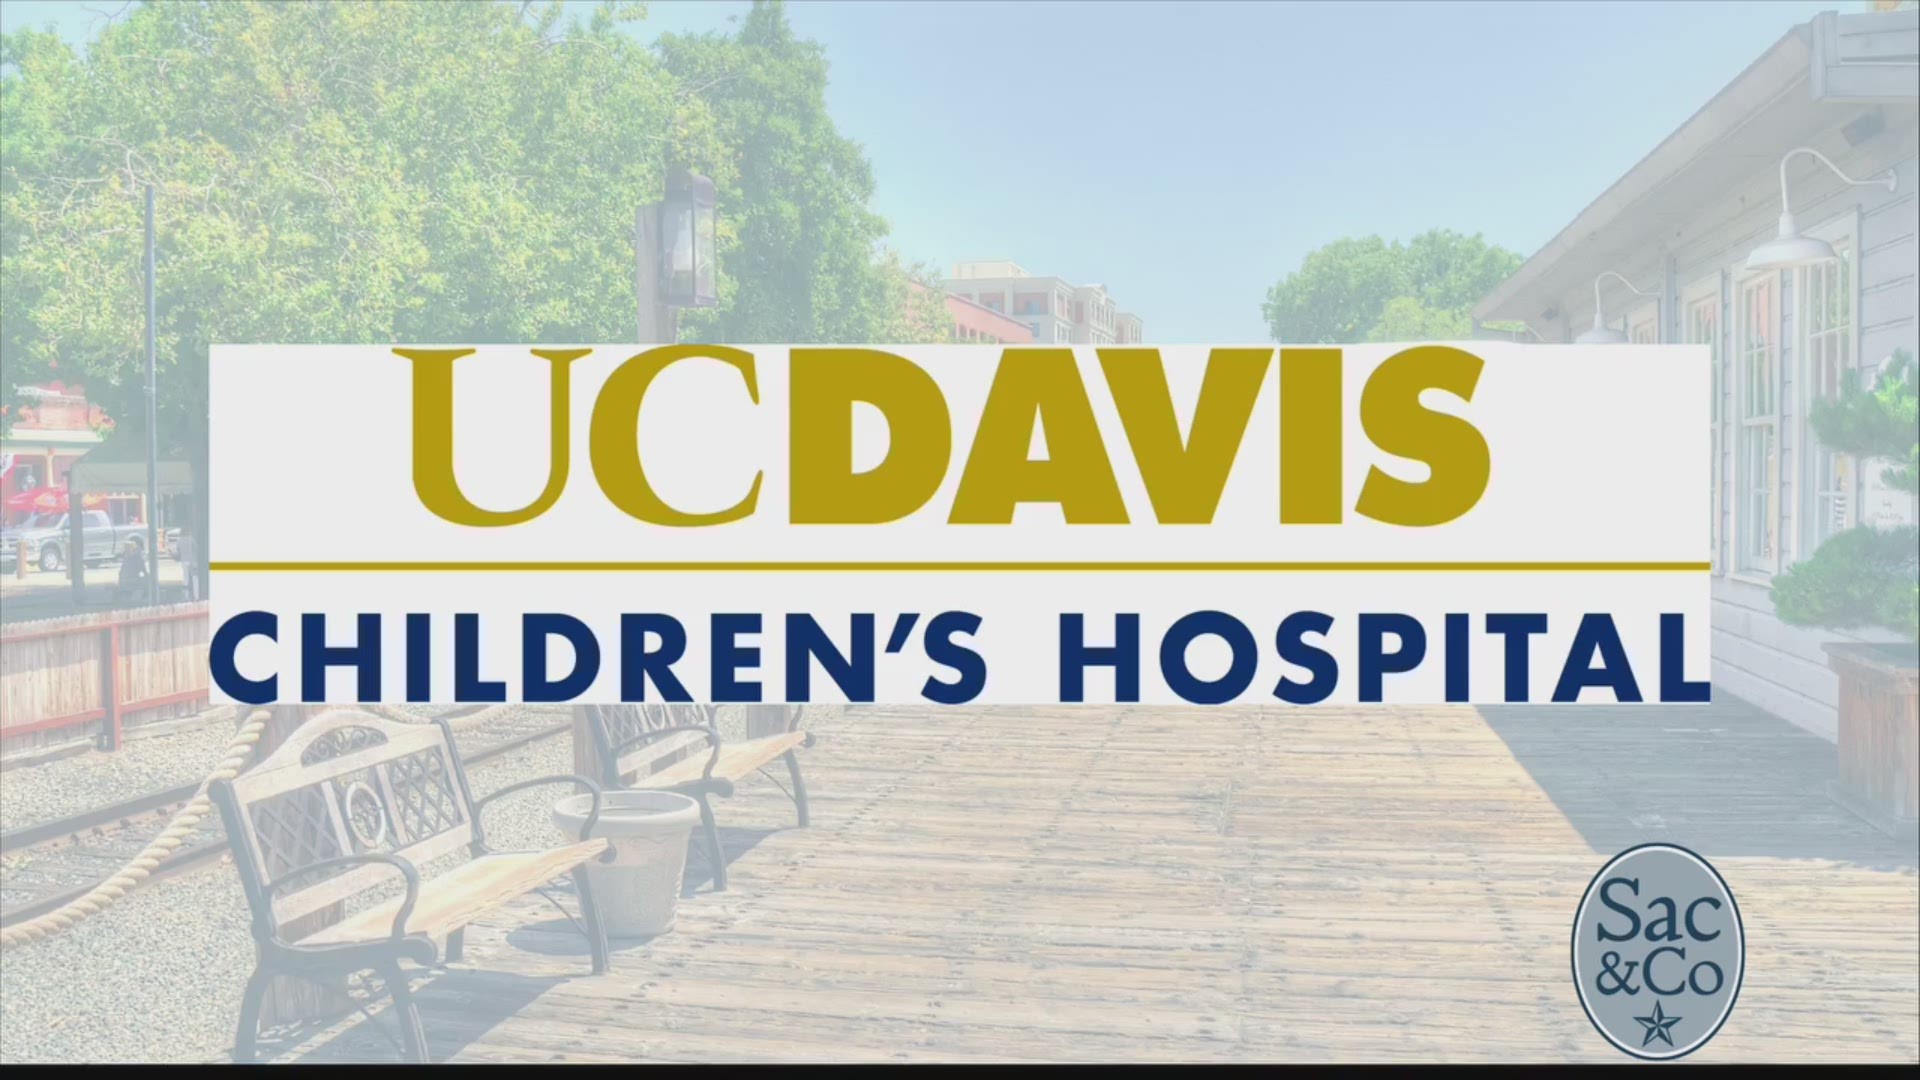 ABC10 10 Books to Read is sponsored by UC Davis Children's Hospital.